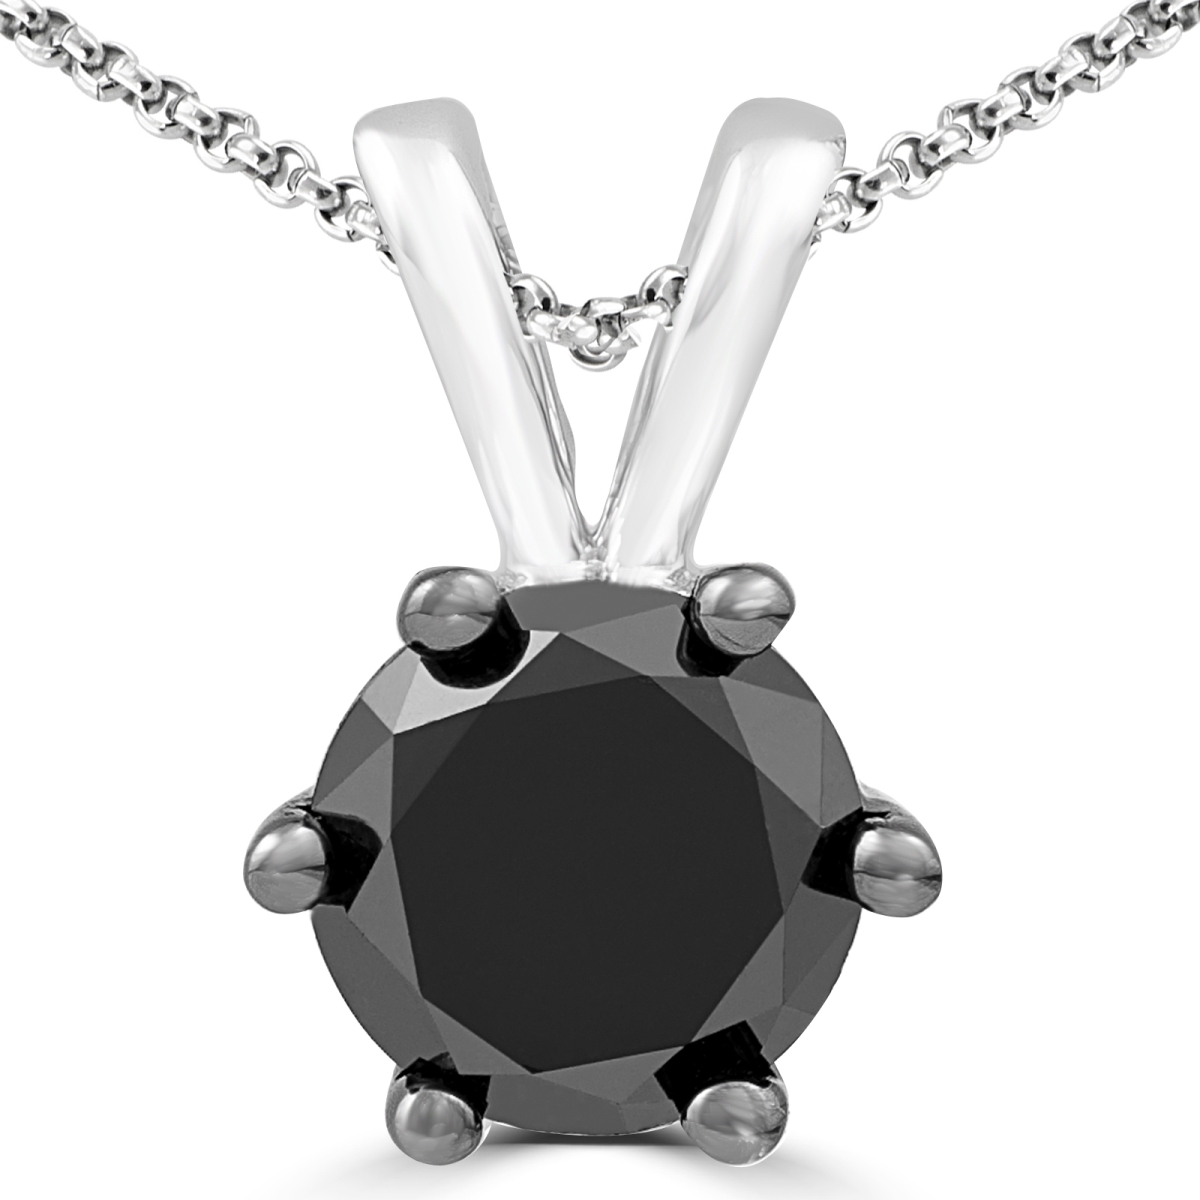 Mdr160011 0.5 Ct Round Black Diamond 6 Prong Solitaire Pendant Necklace In 10k